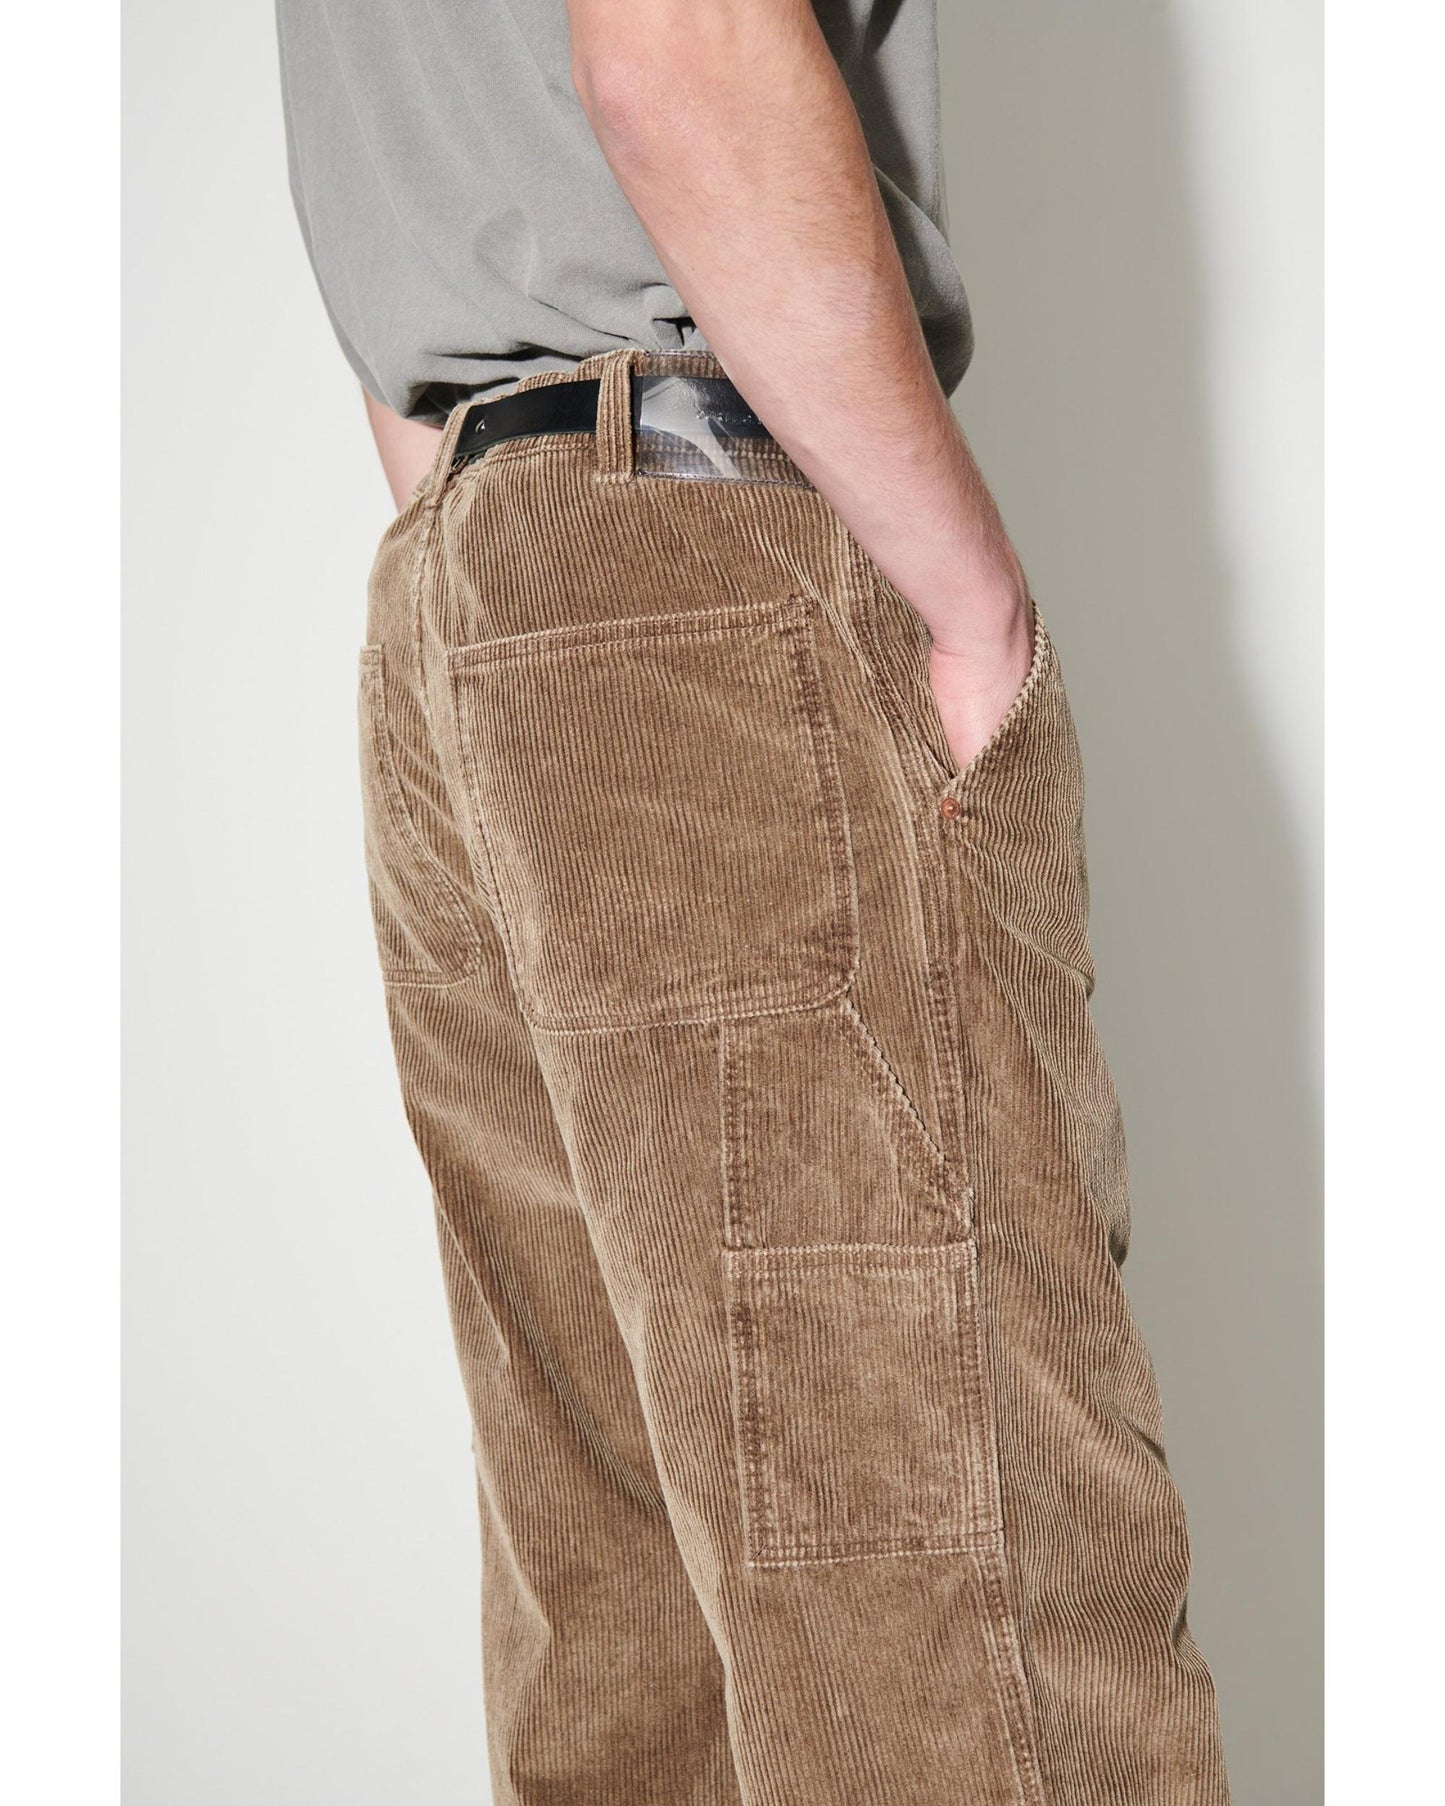 JOINER TROUSER   BROWN ENZYME CORD